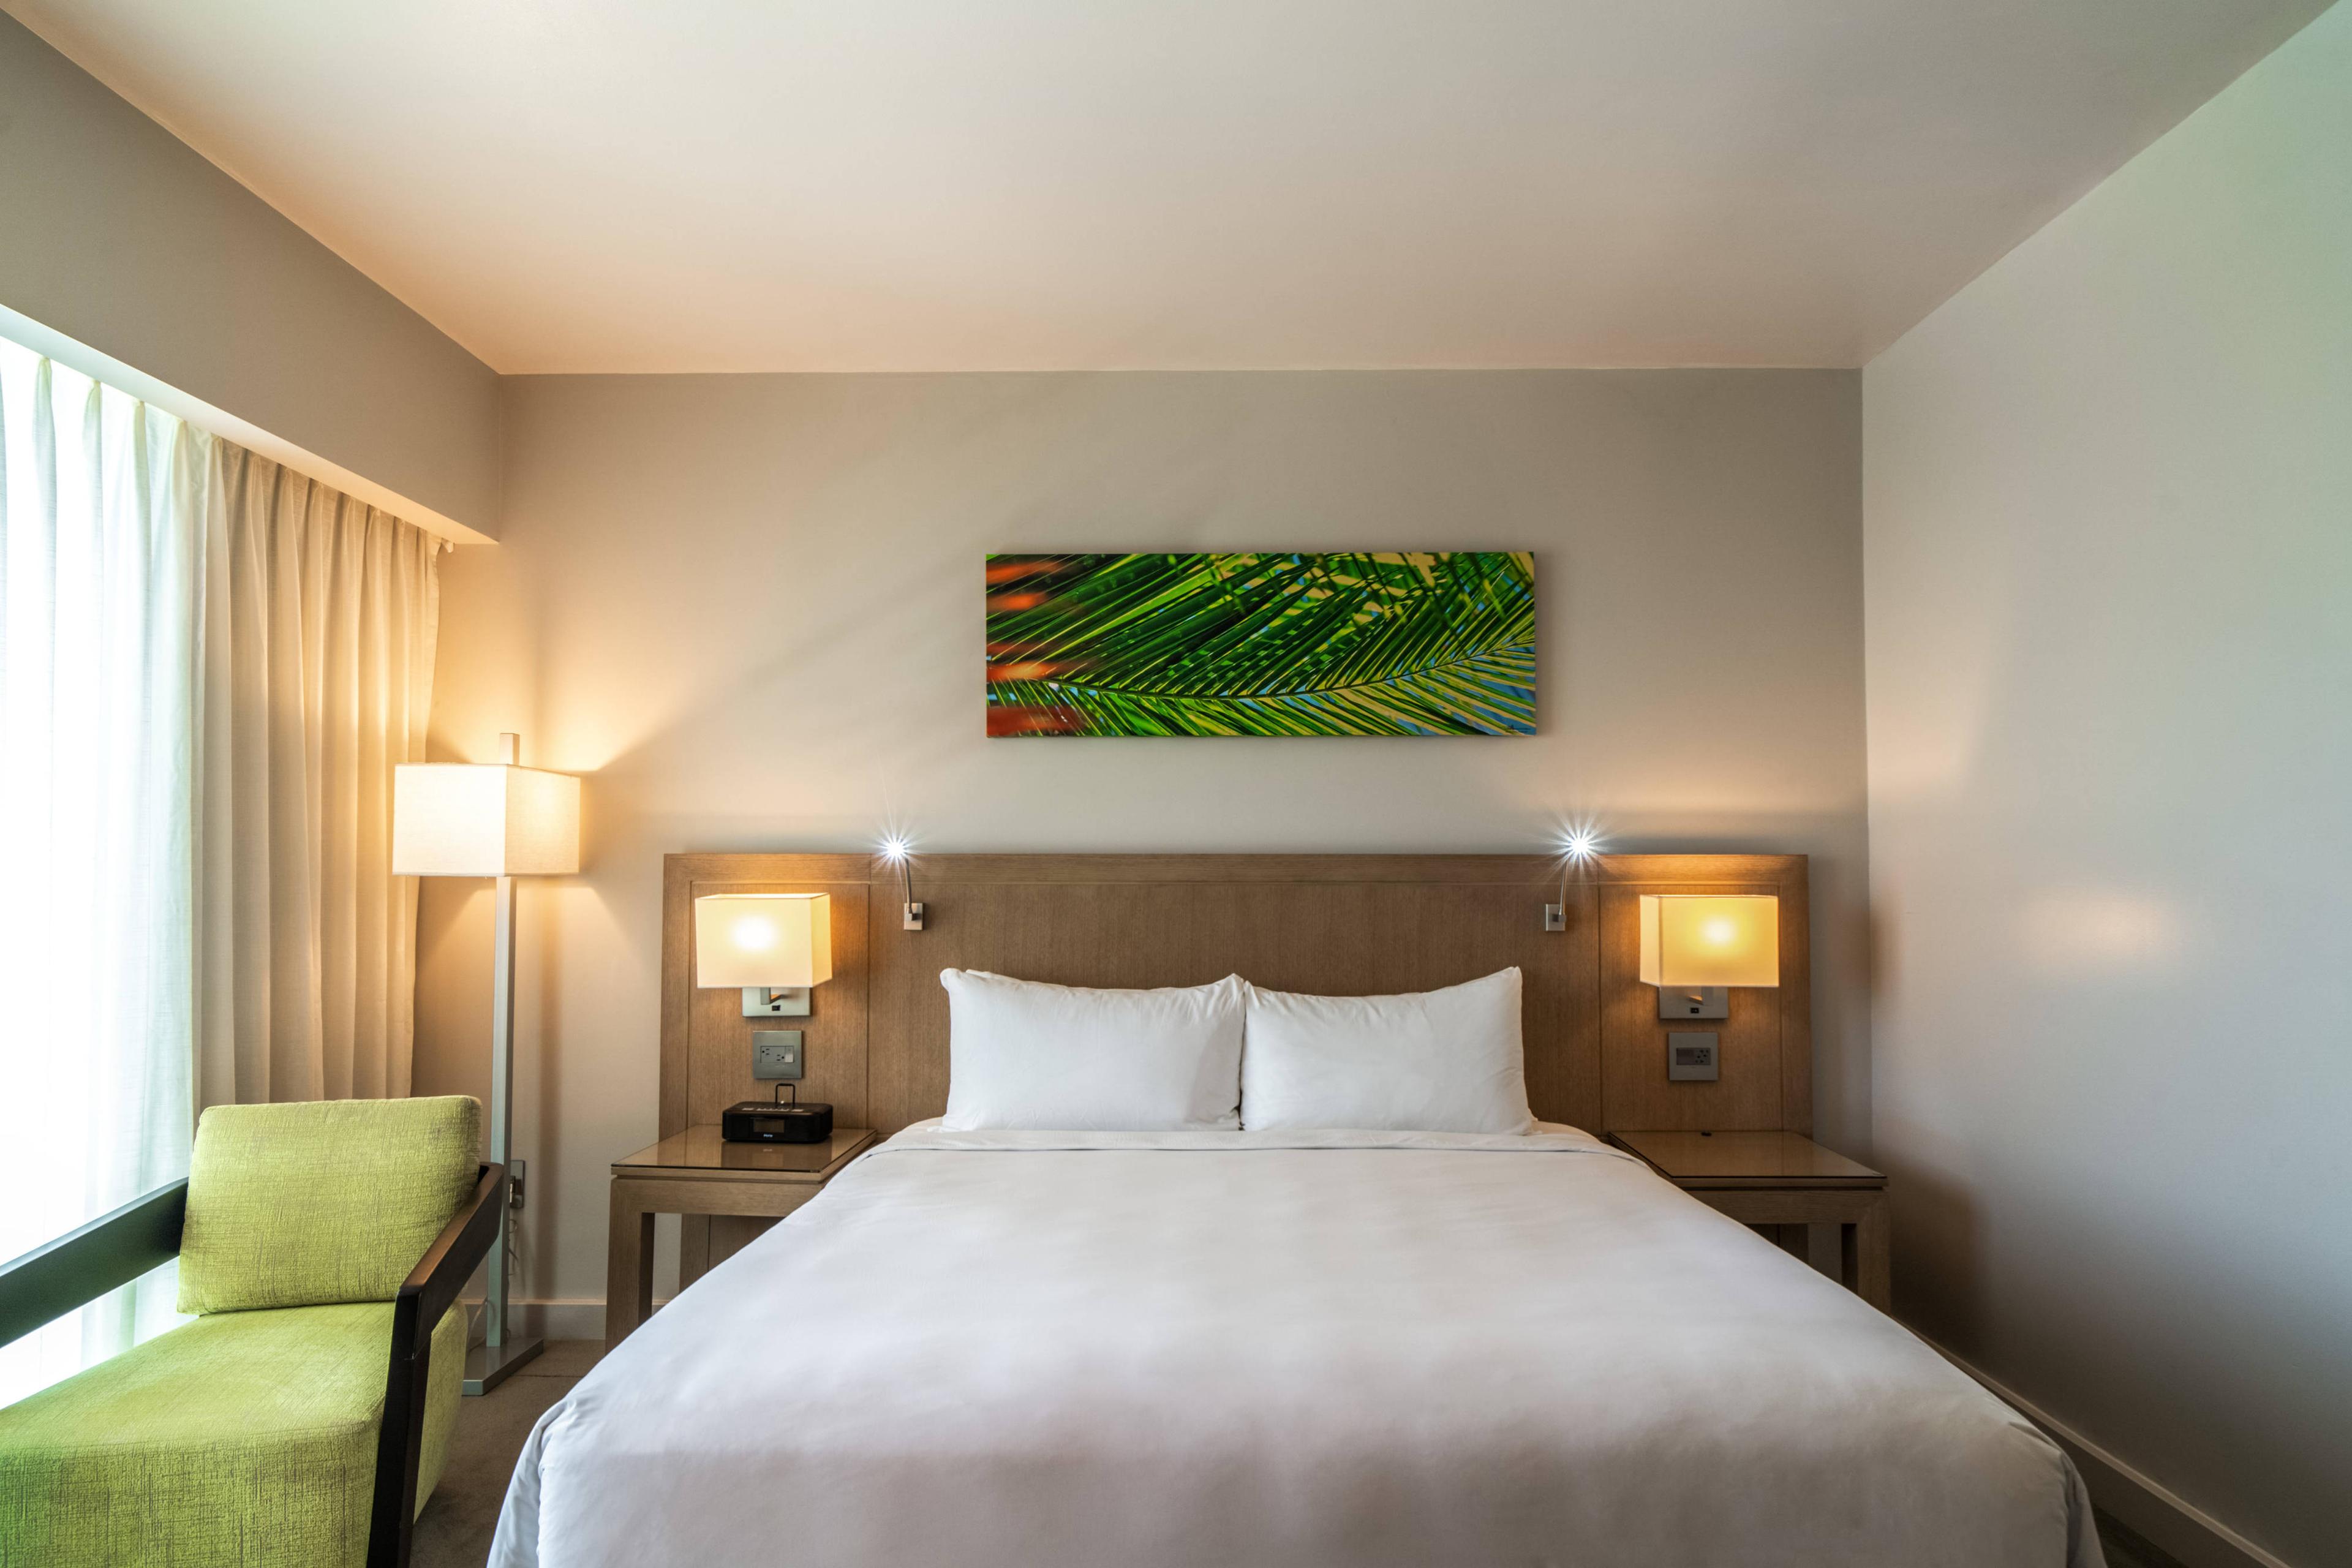 Relax and get a repairing night of sleep at our well appointed guestrooms featuring modern decor